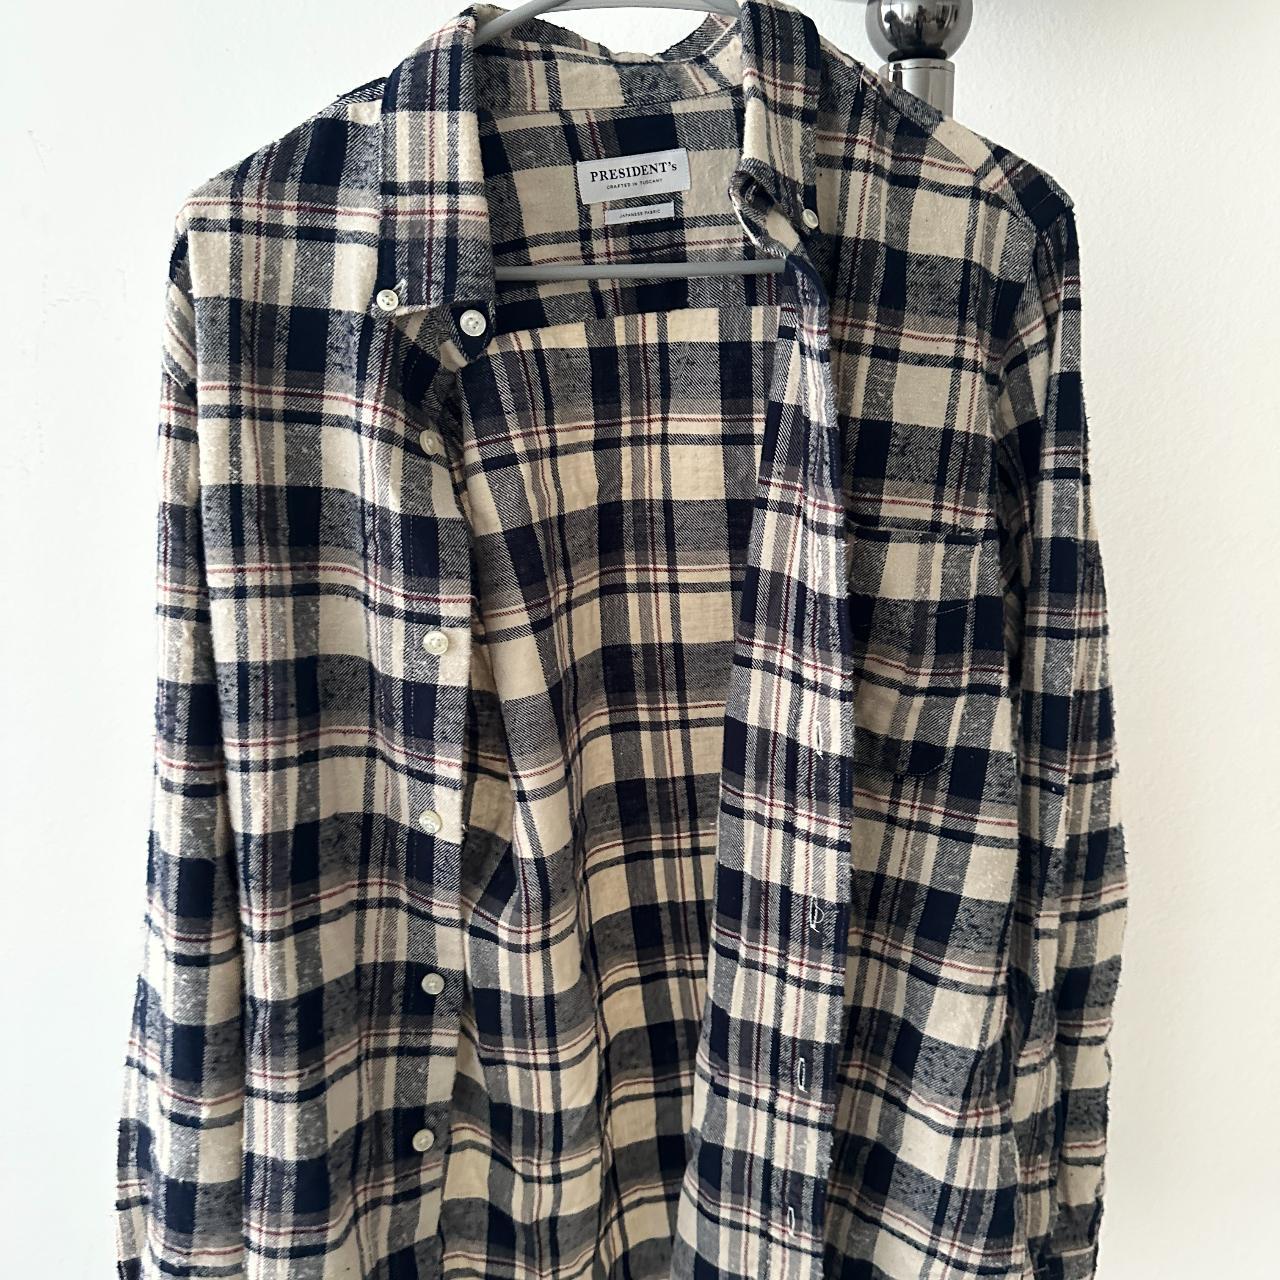 President's - Made In Tuscany Plaid Shirt Brand... - Depop